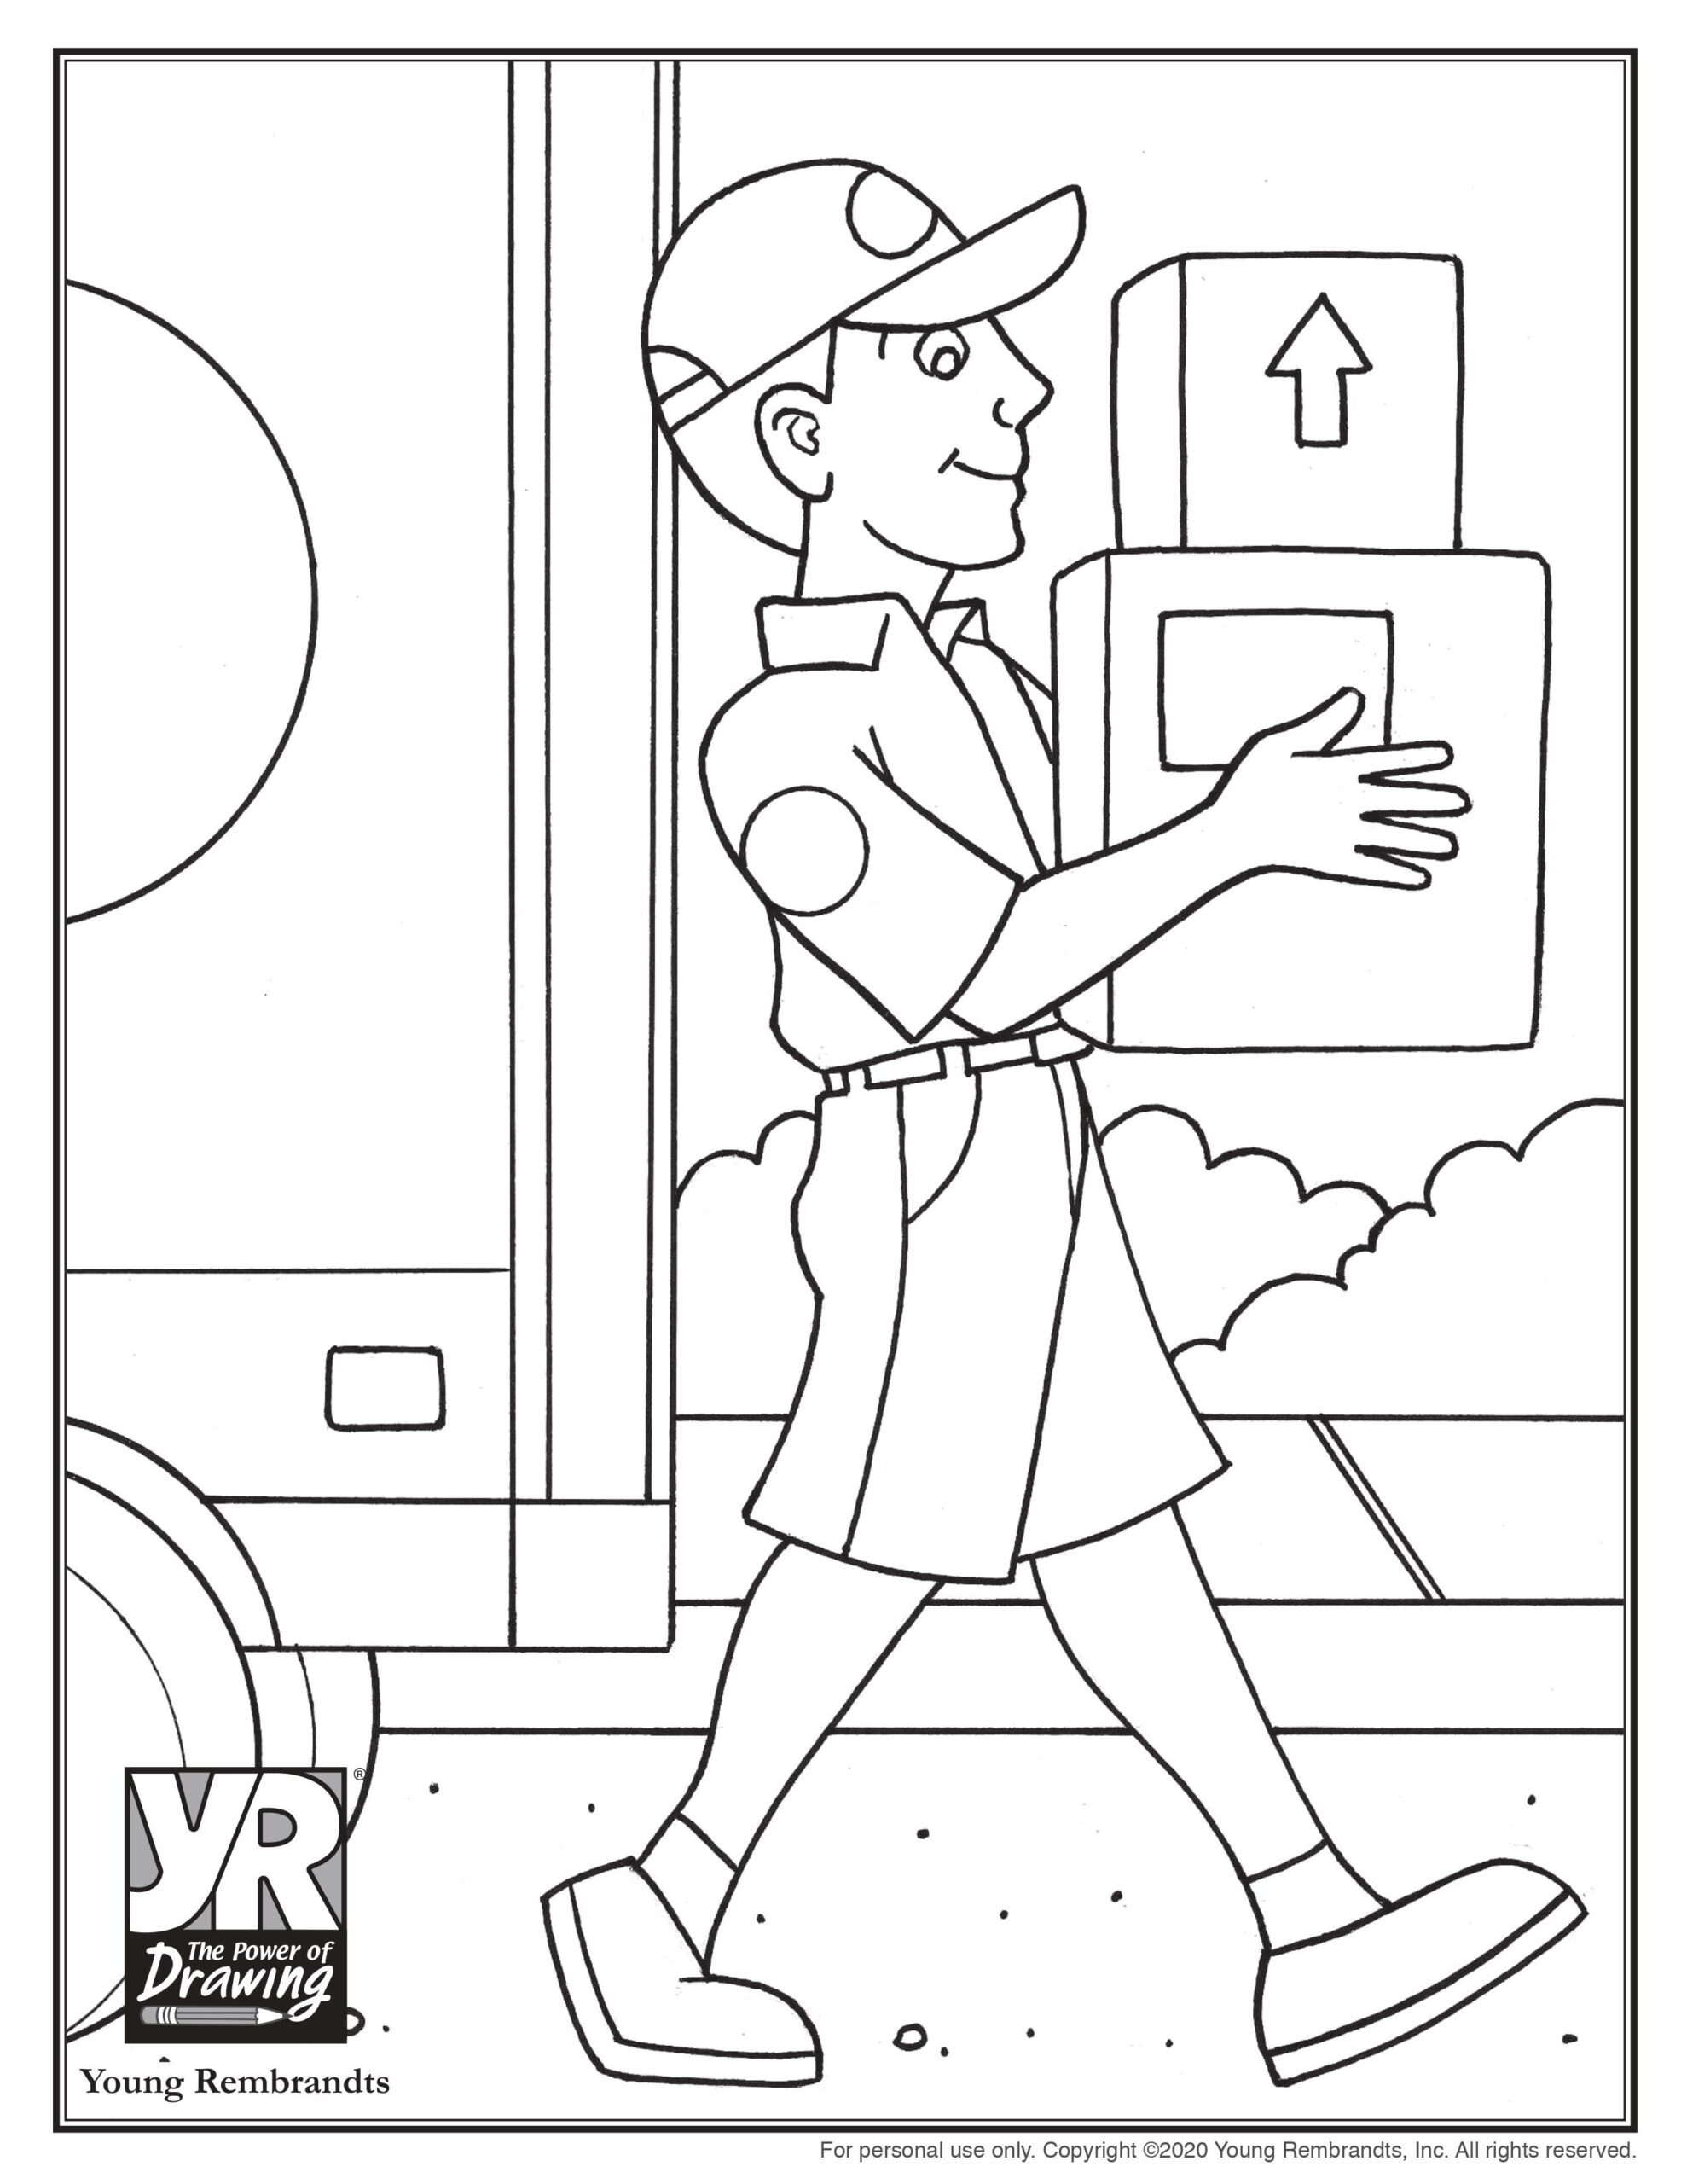 Delivery Man Coloring Page - Young Rembrandts Shop